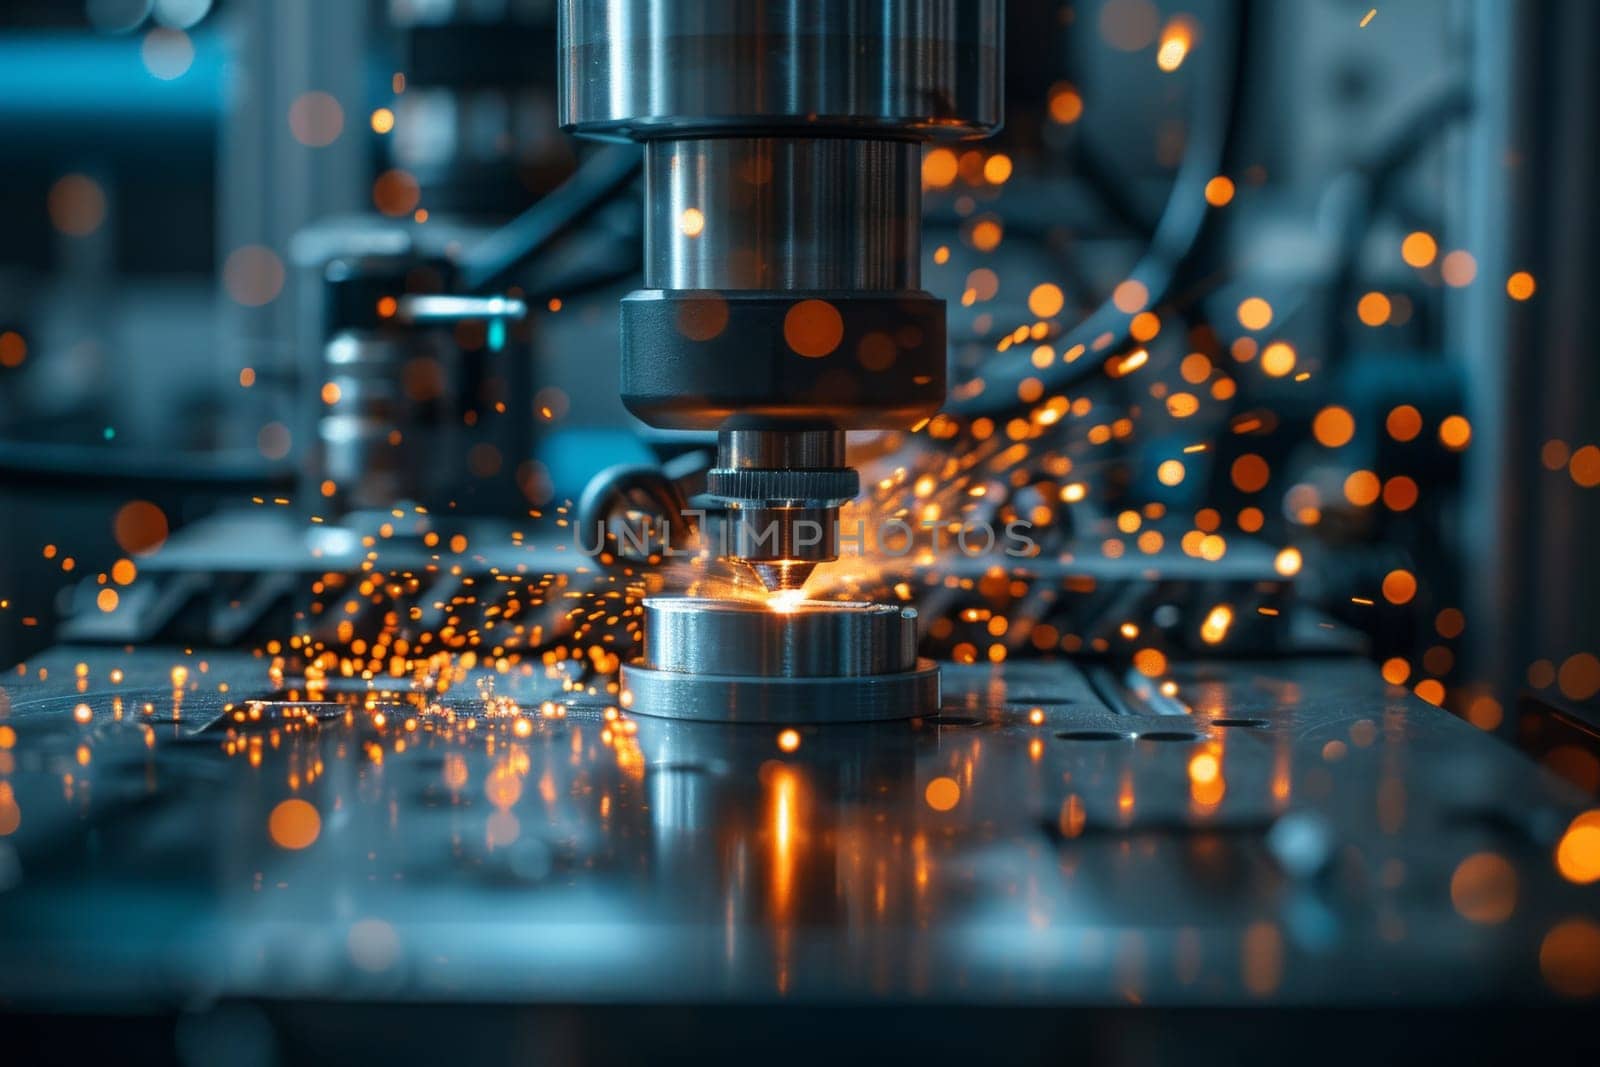 A machine is cutting through metal, creating sparks and a sense of danger. The image conveys a feeling of intense work and the potential for danger in the process